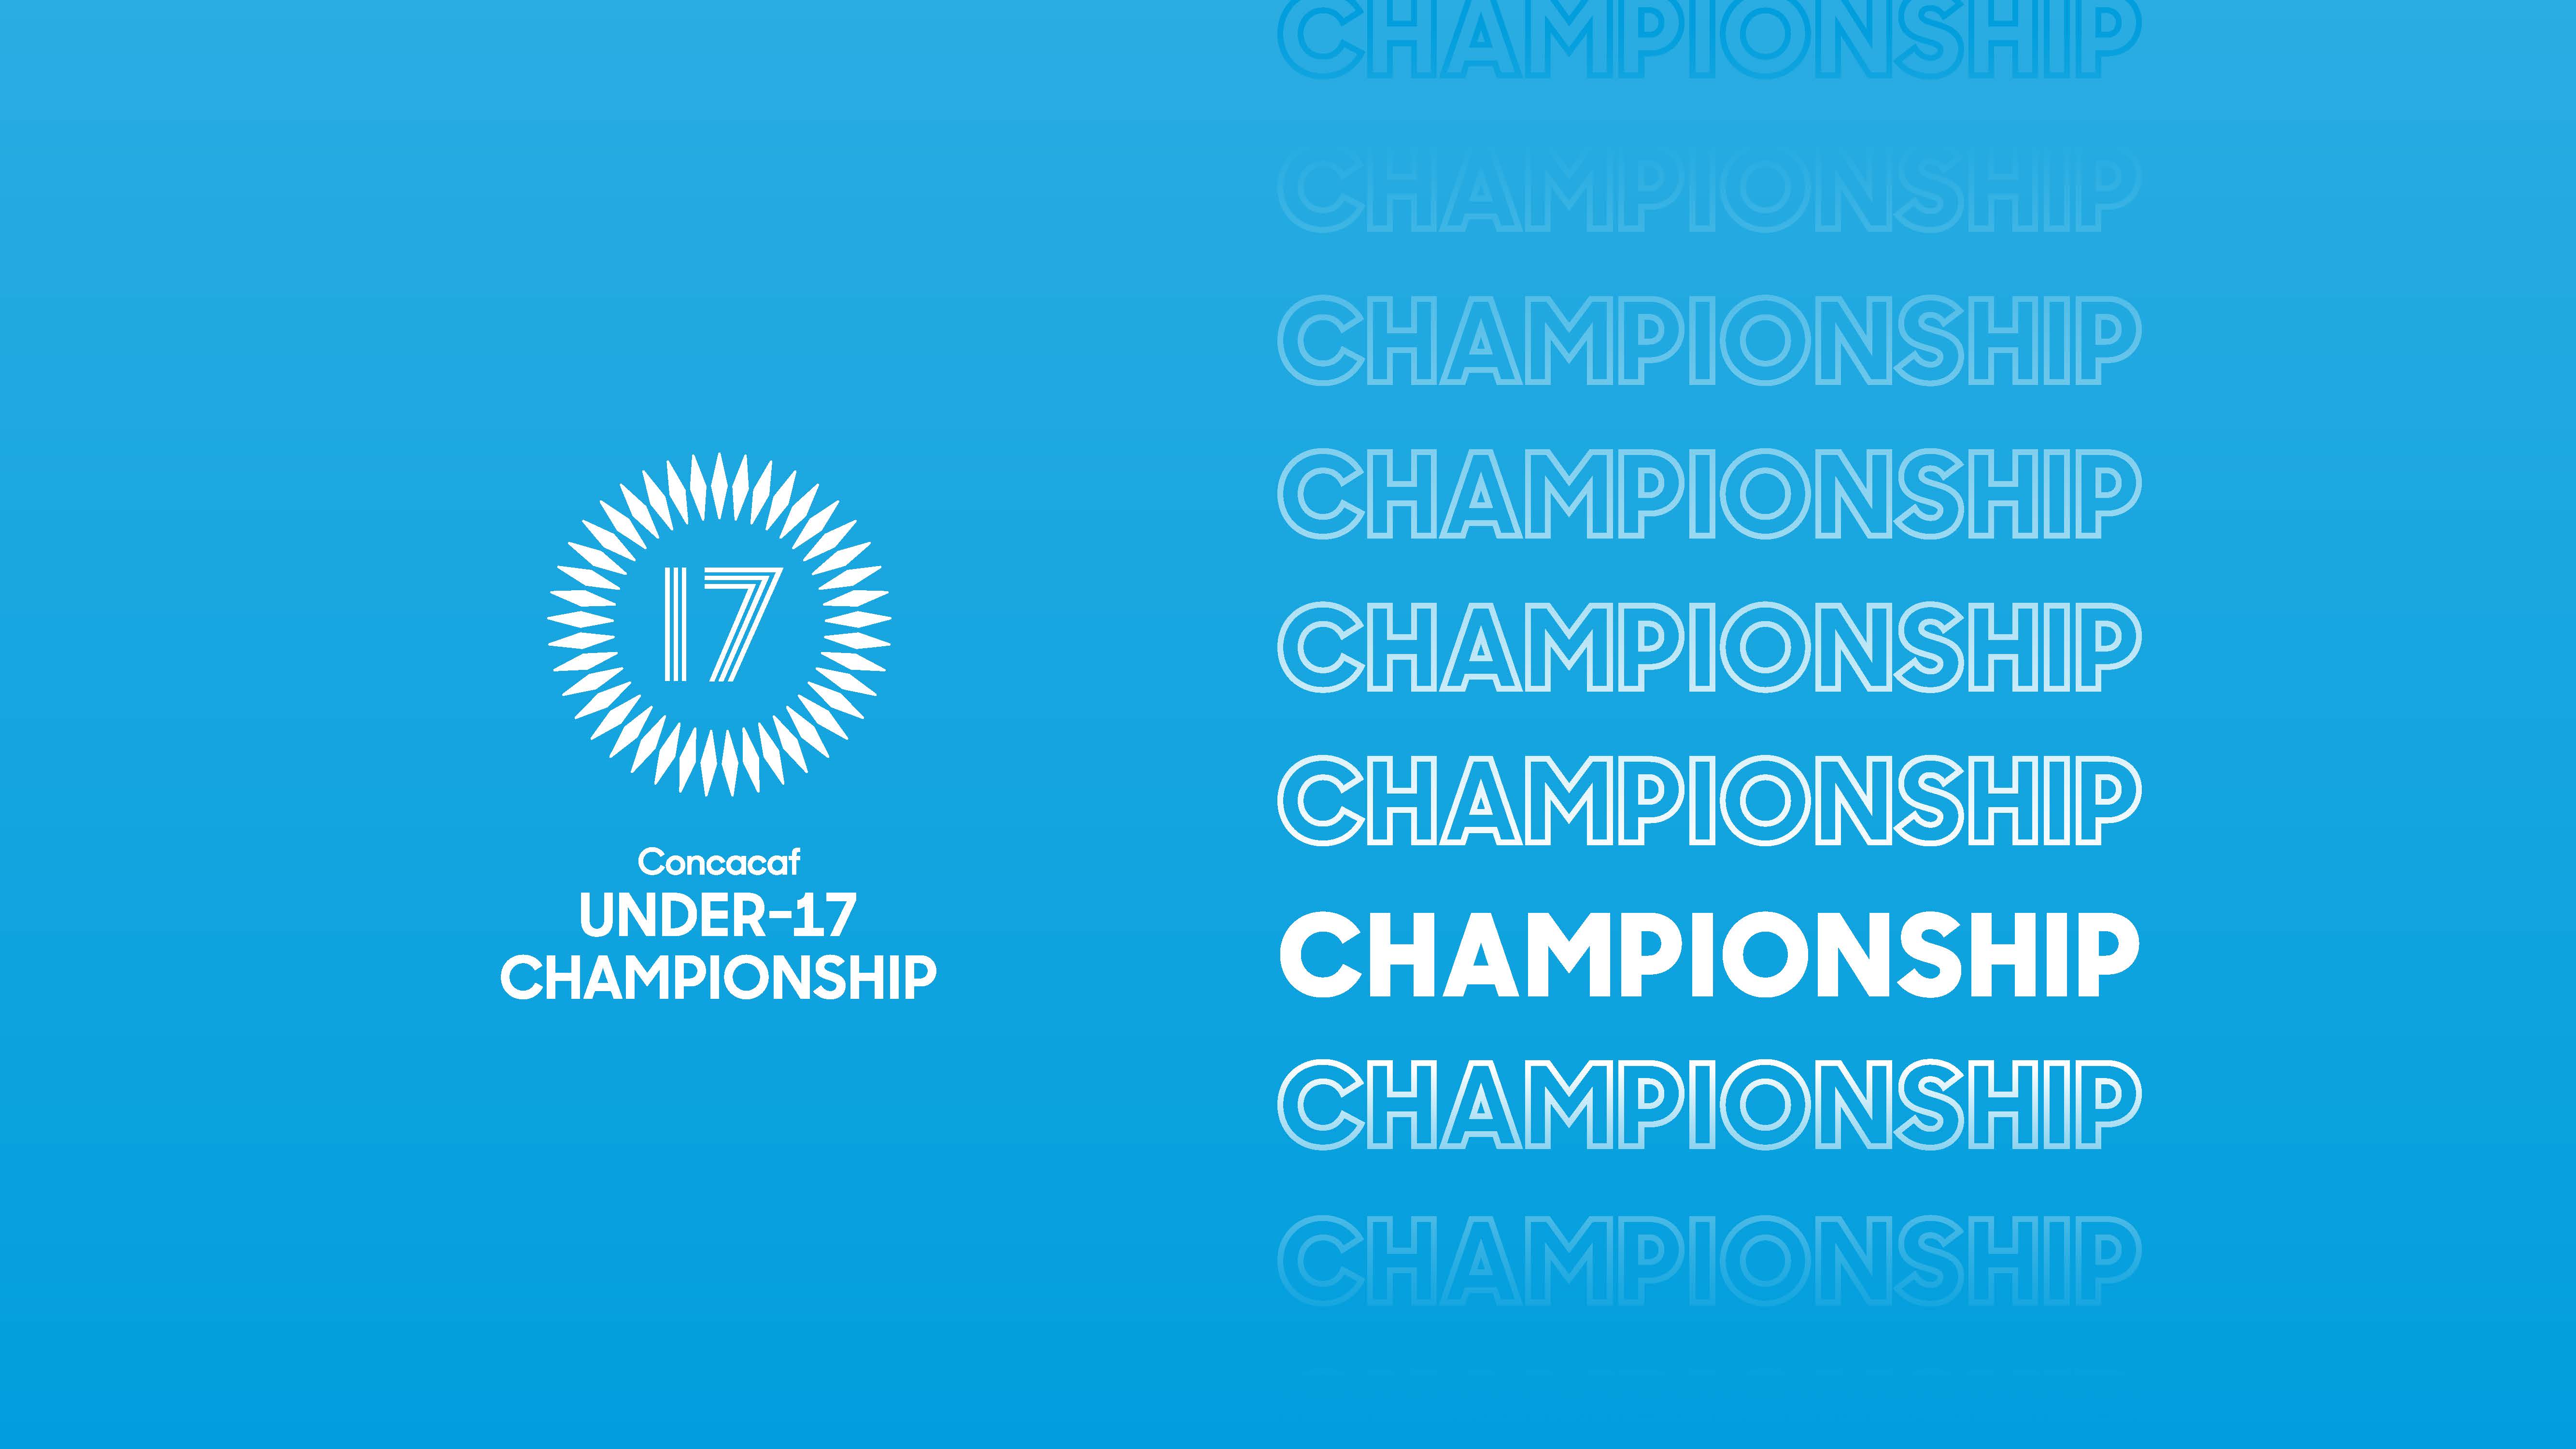 Guatemala to host Concacaf U-17 2023 final, pre-qualifying groups start end of August